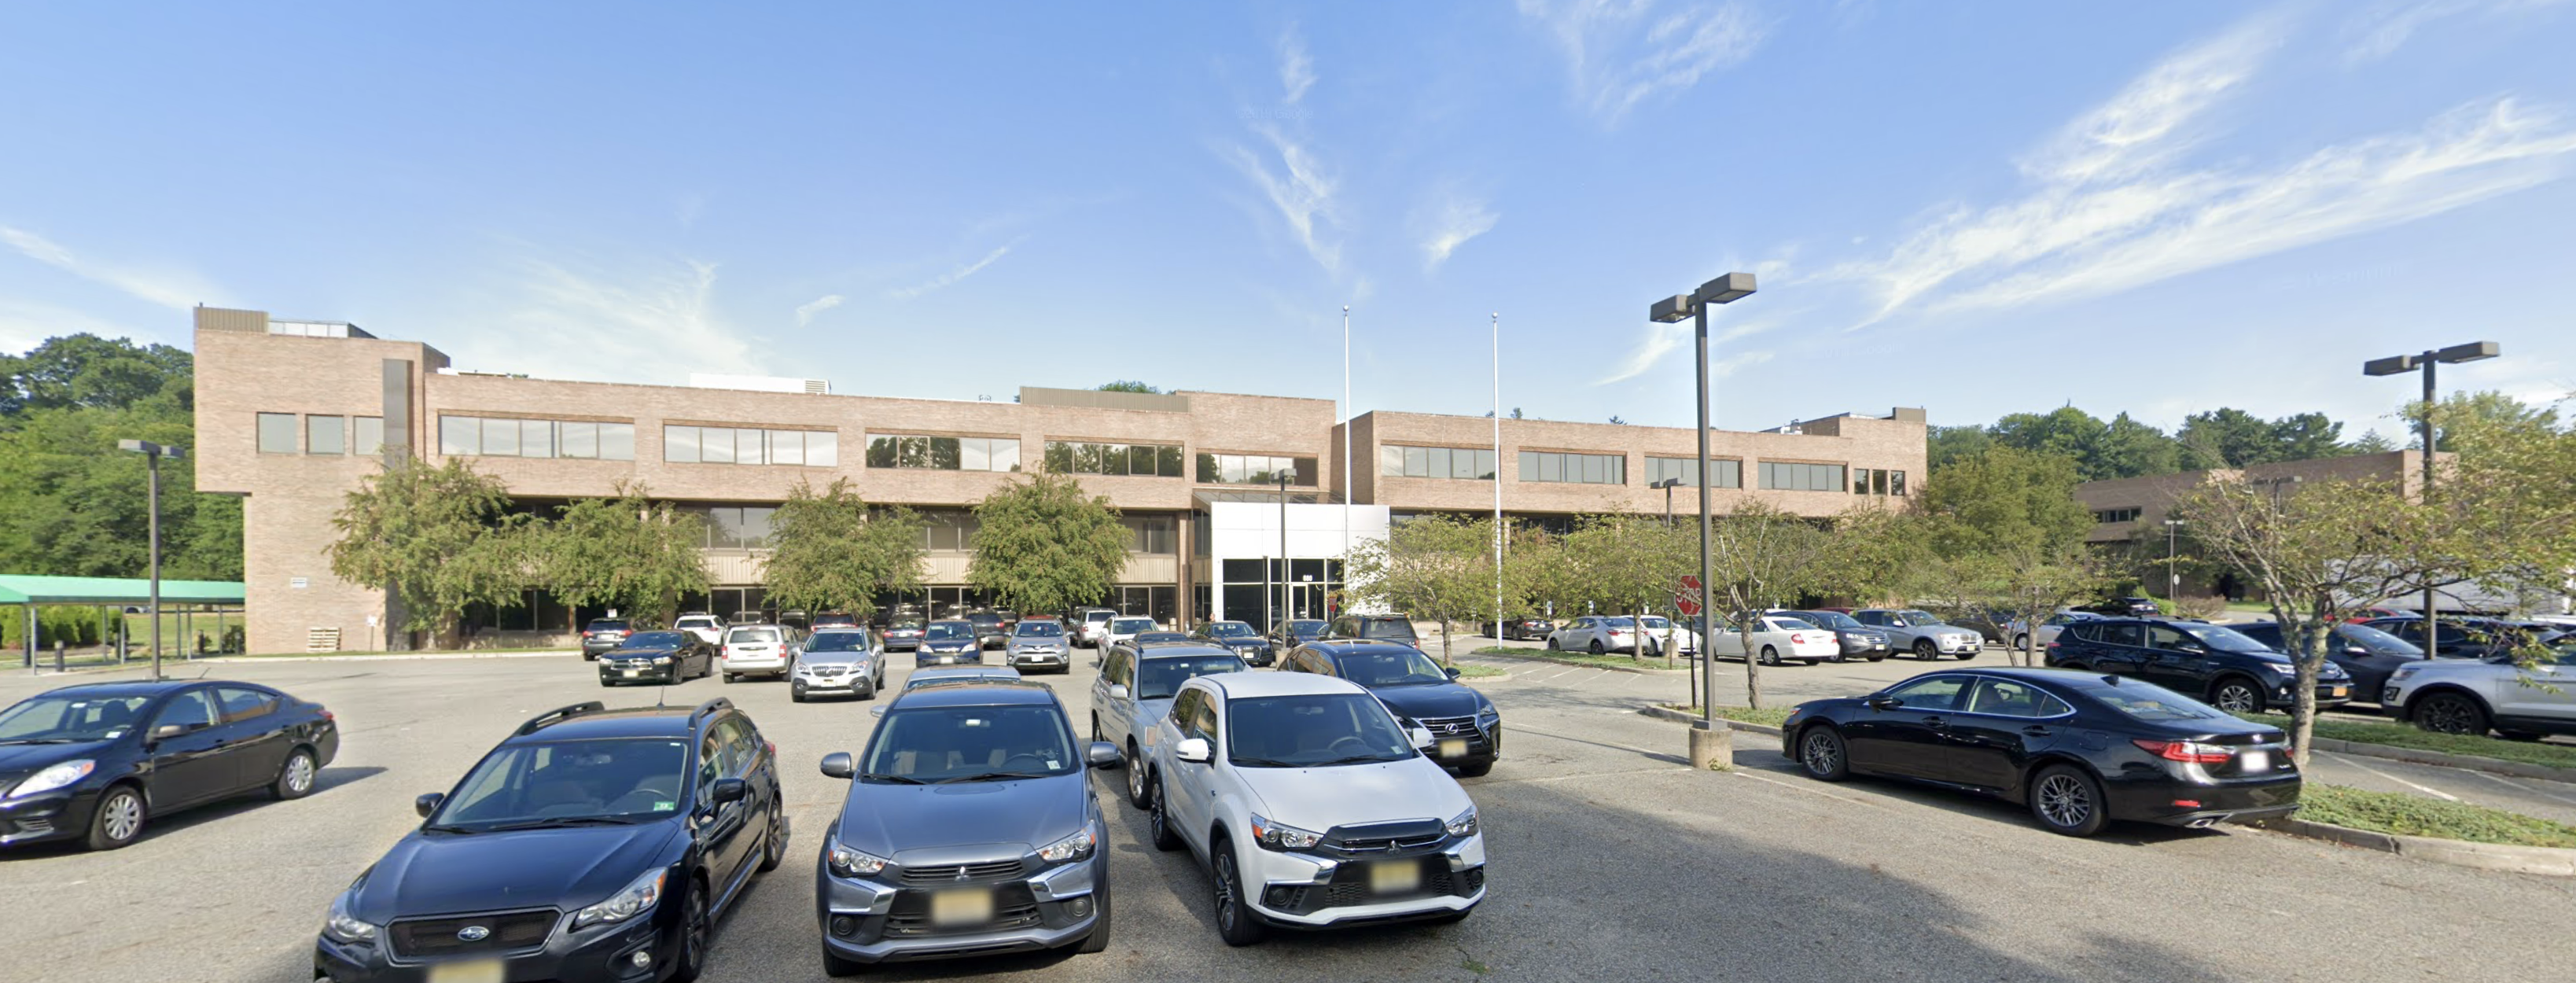 Oradell office building - New Jersey Brain and Spine - Bergen County, NJ